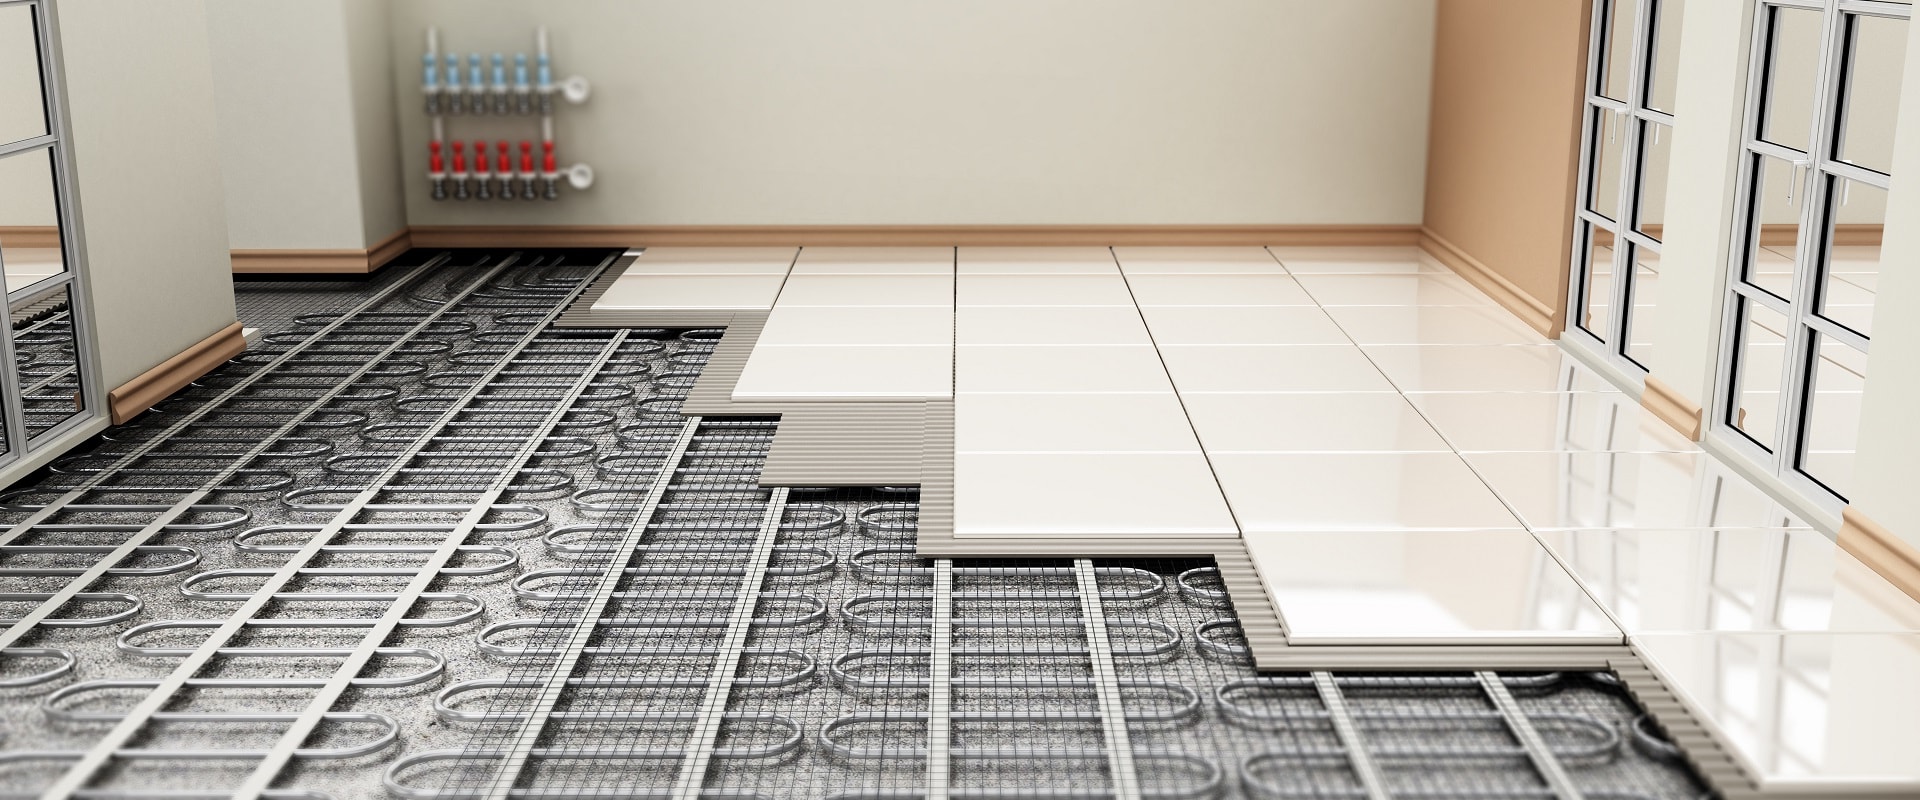 What is the most economical way to run underfloor heating?